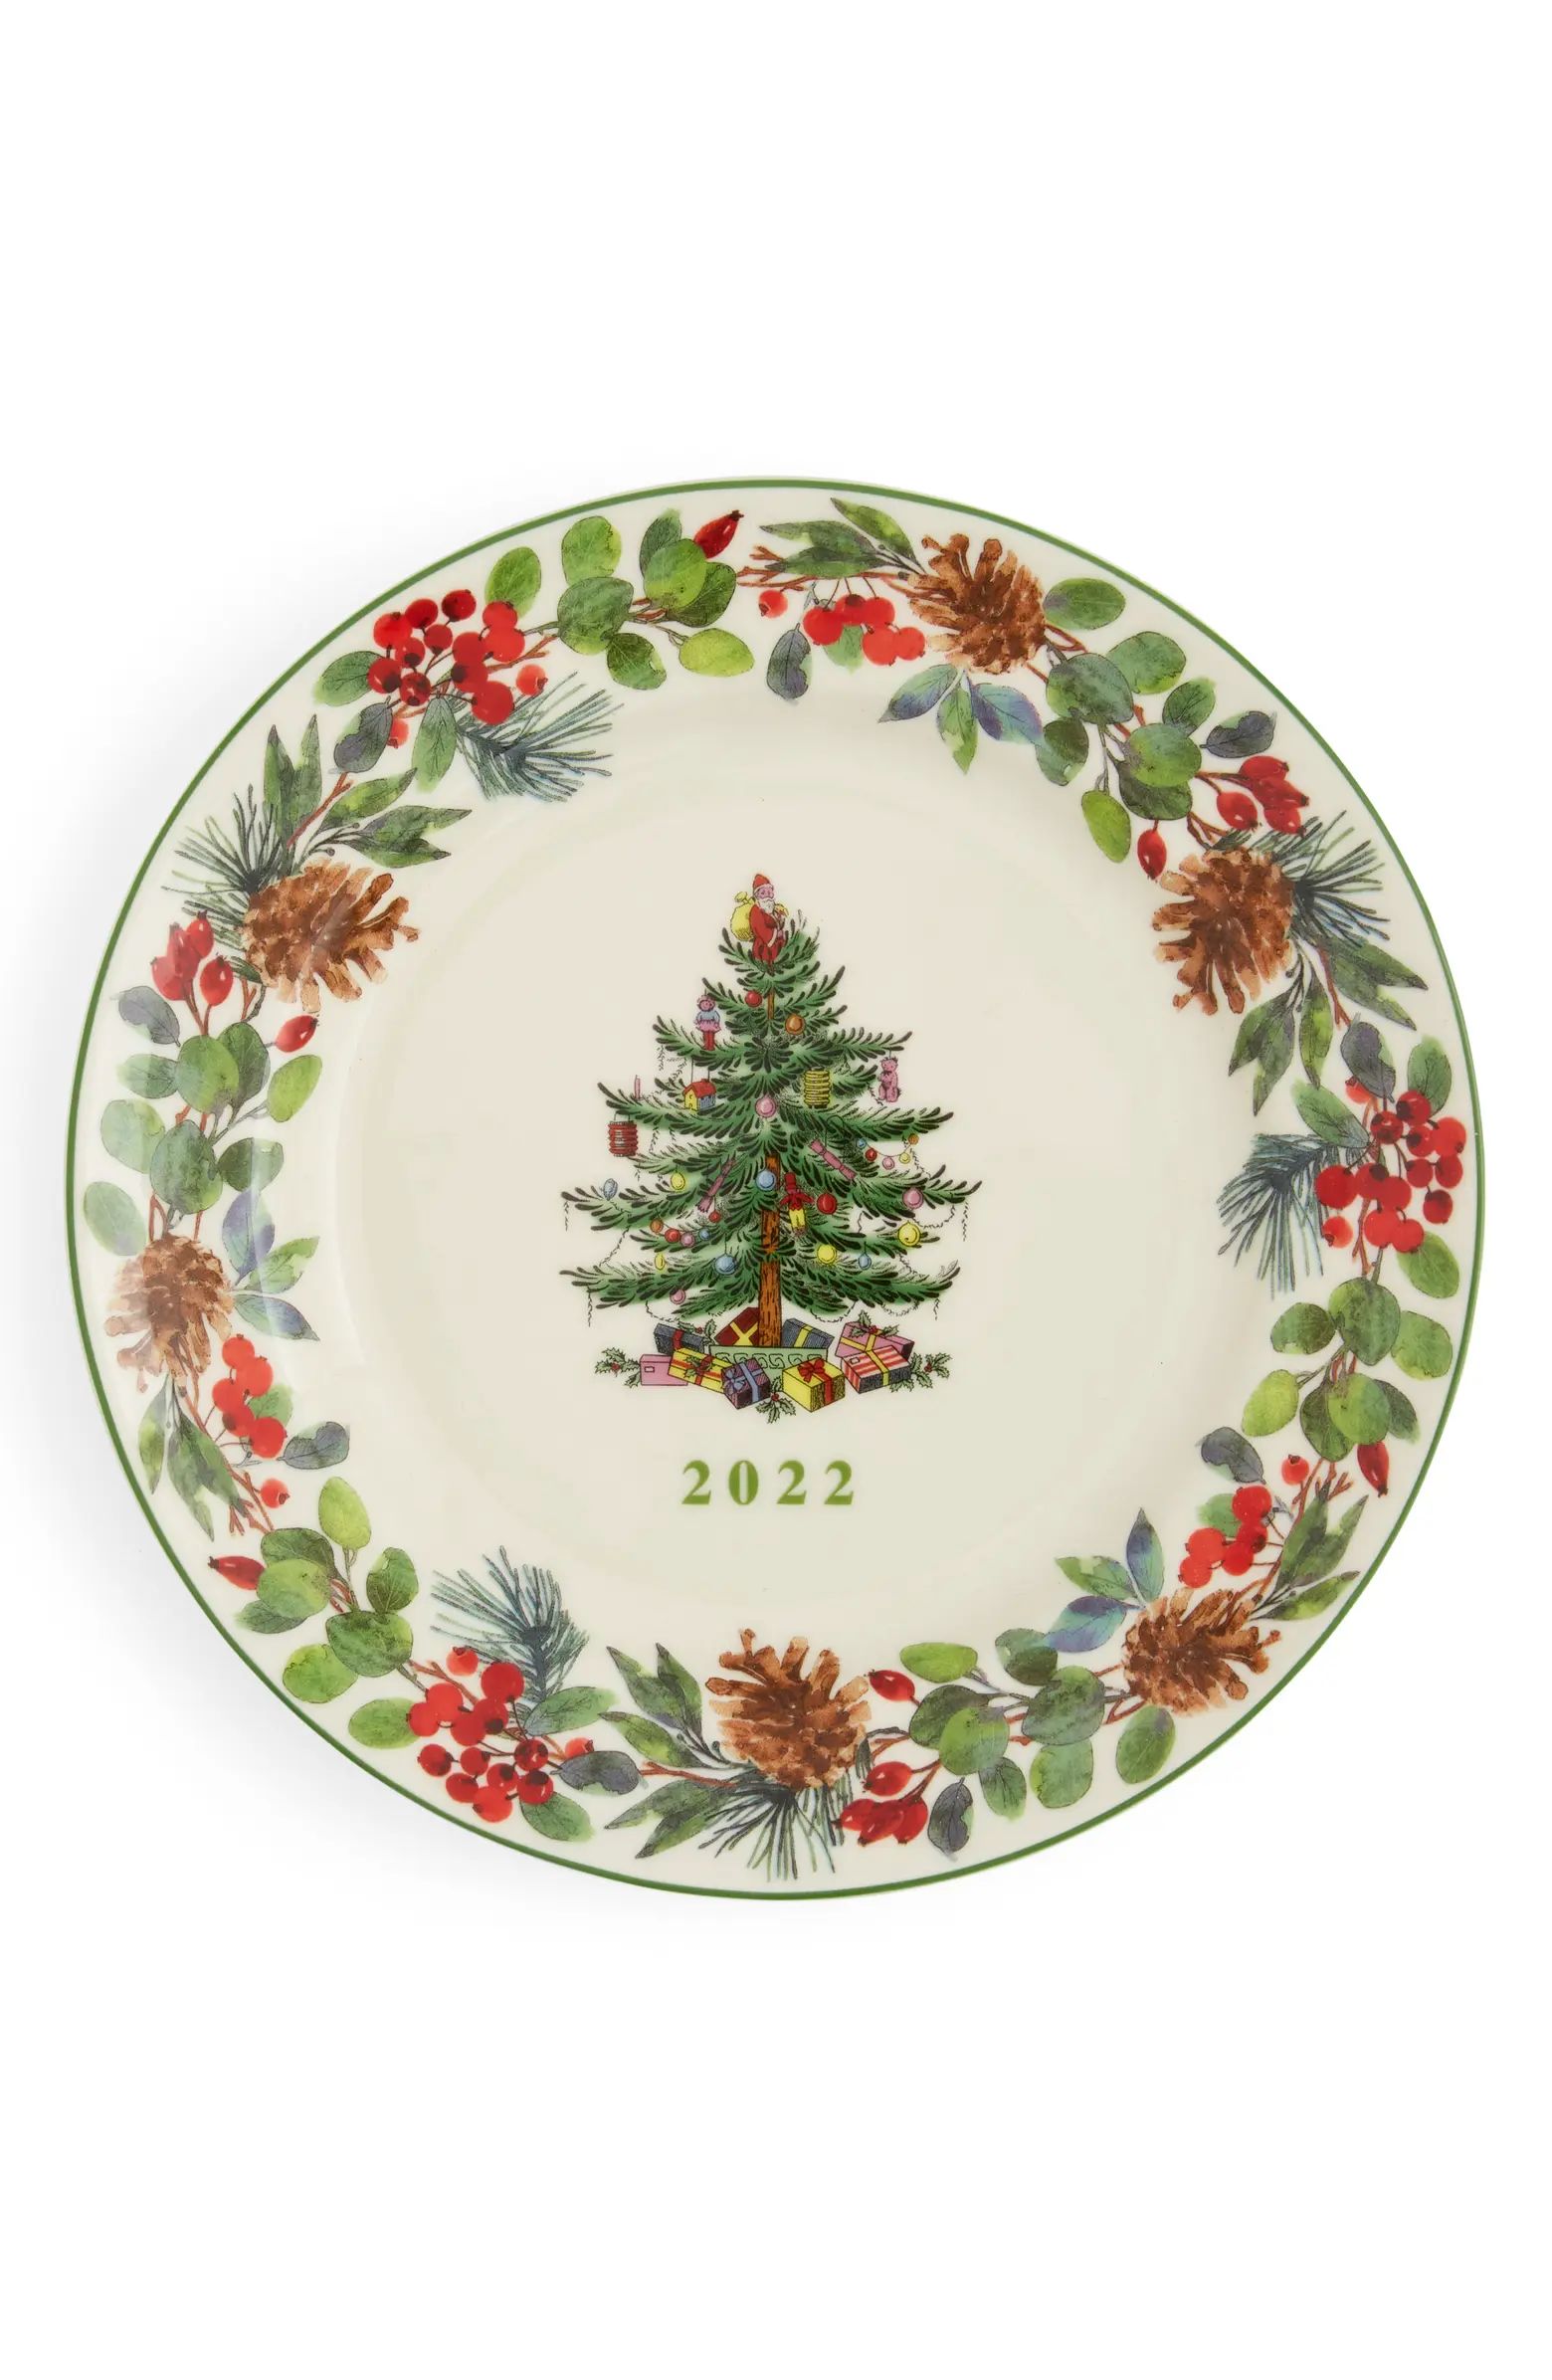 2022 Annual Edition Collector Plate | Nordstrom